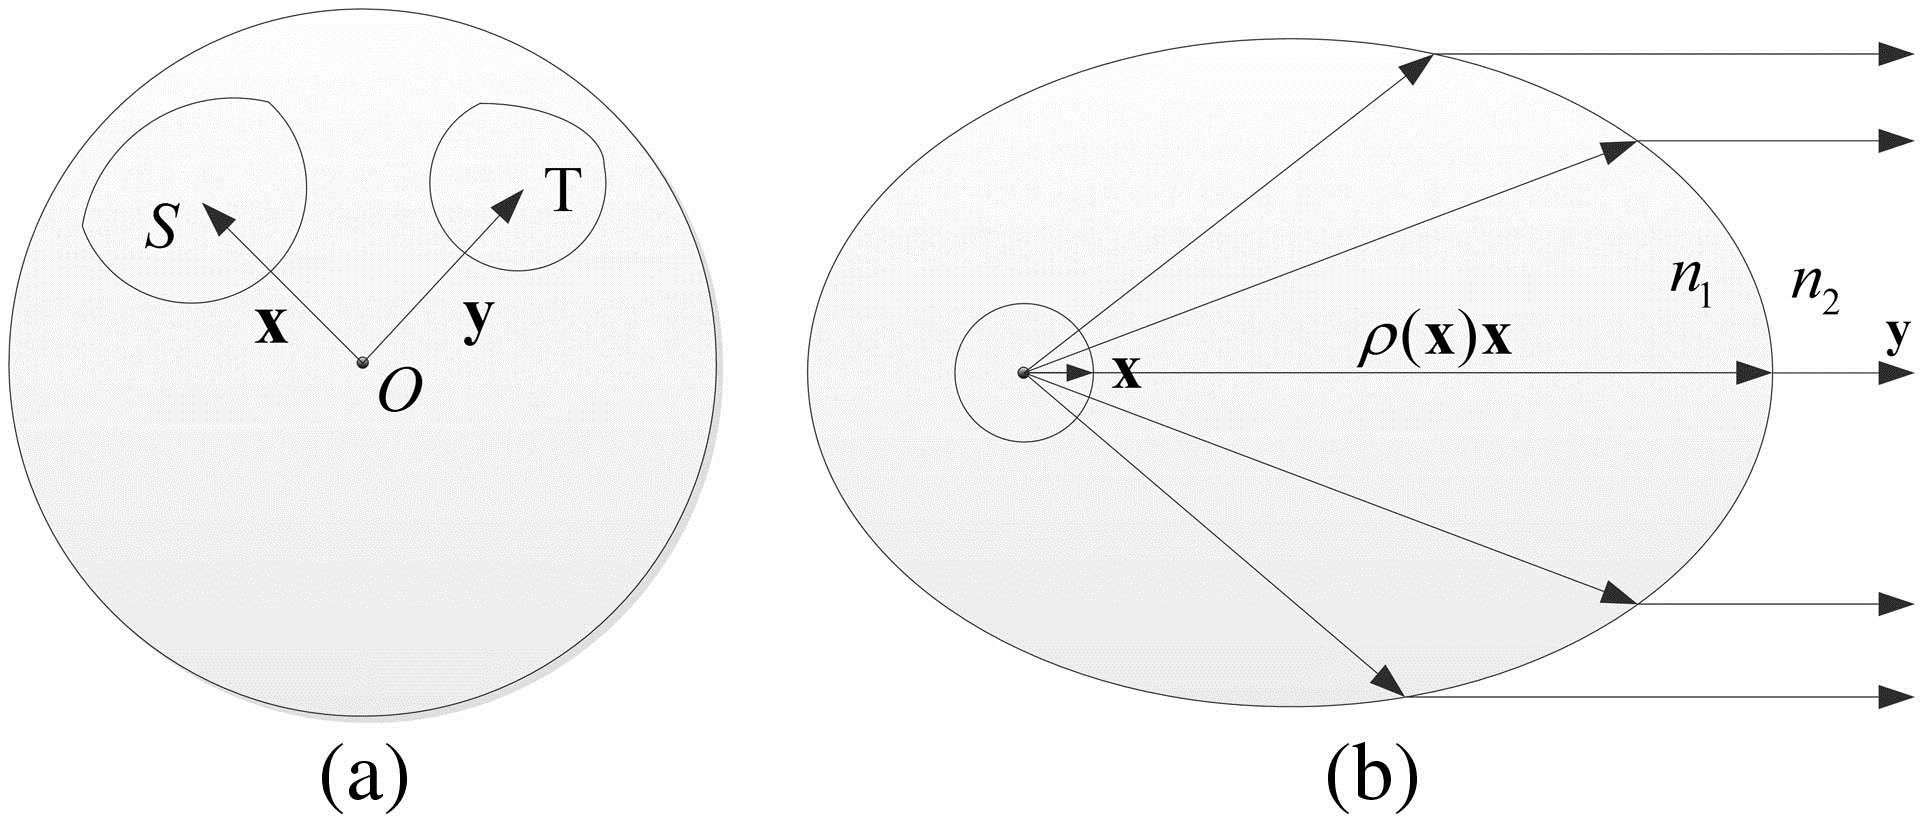 (a) Problem of reshaping the light of LED is about to map the Vector x of Set S to the Vector y of the Set T; (b) refracting property of ellipsoid. As long as the incident angle is smaller than the critical angle, the light from the focus will be refracted by the upper part of the ellipsoid parallel to its major axis.